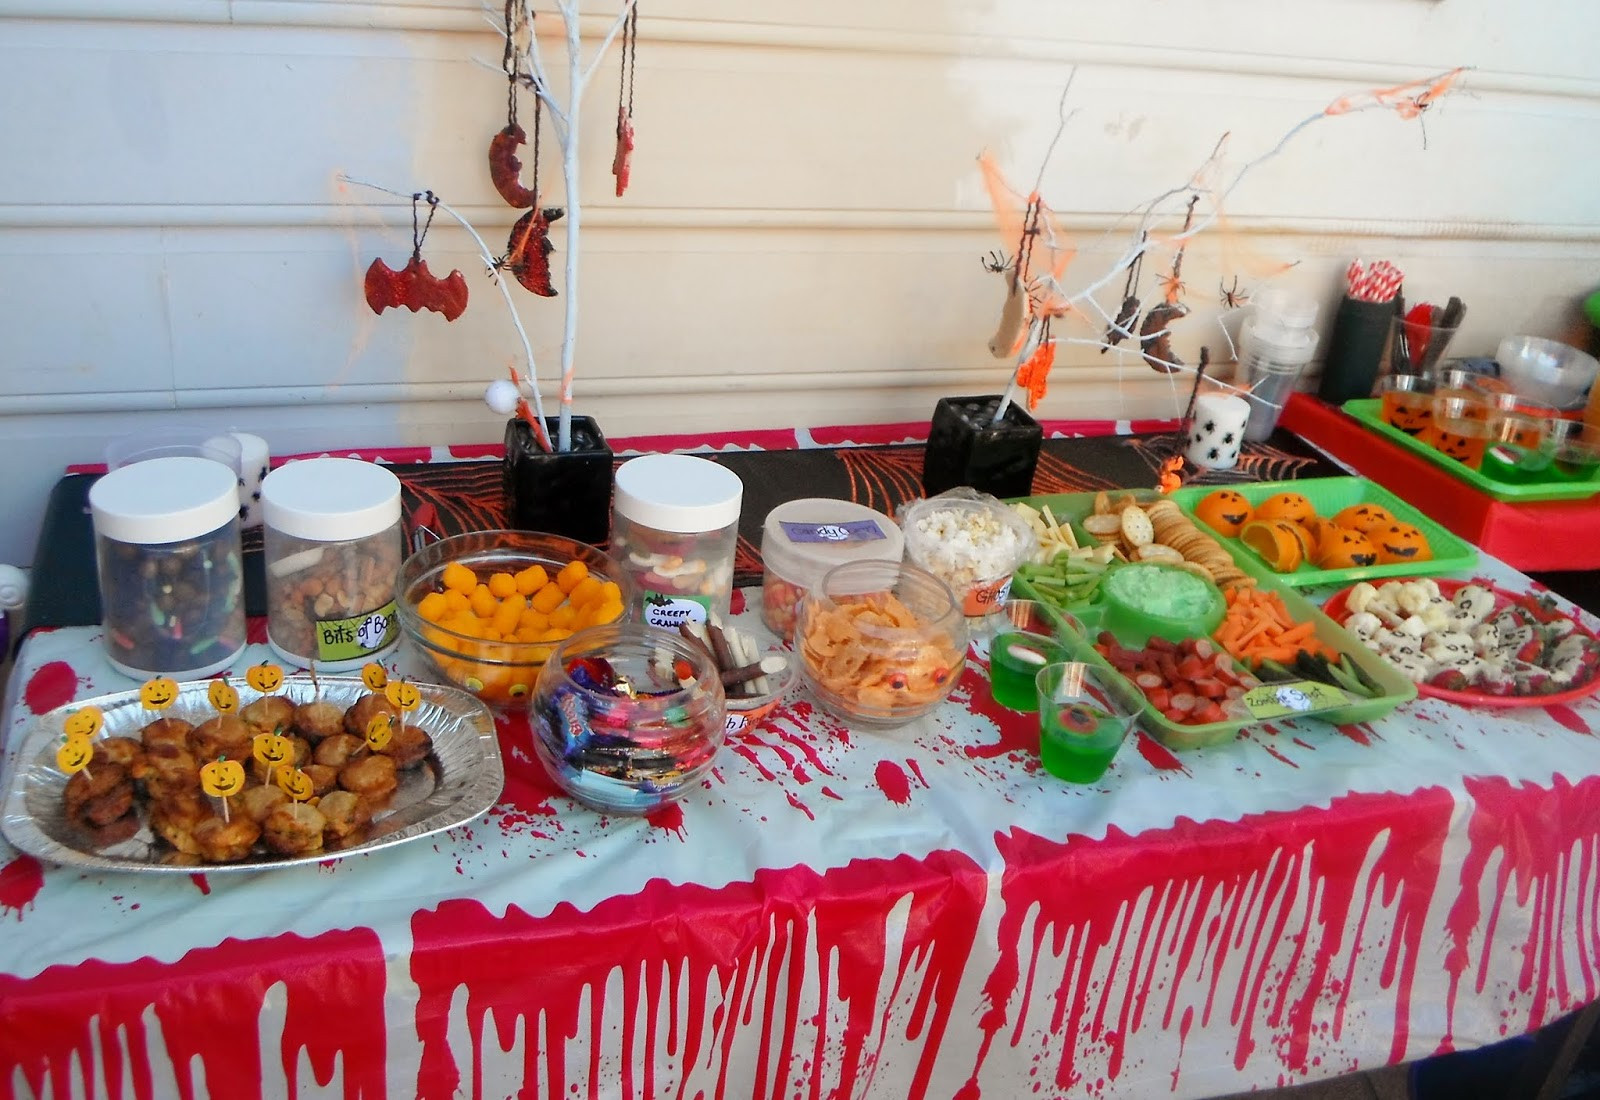 Scary Food Ideas For Halloween Party
 Adventures at home with Mum Halloween Party Food